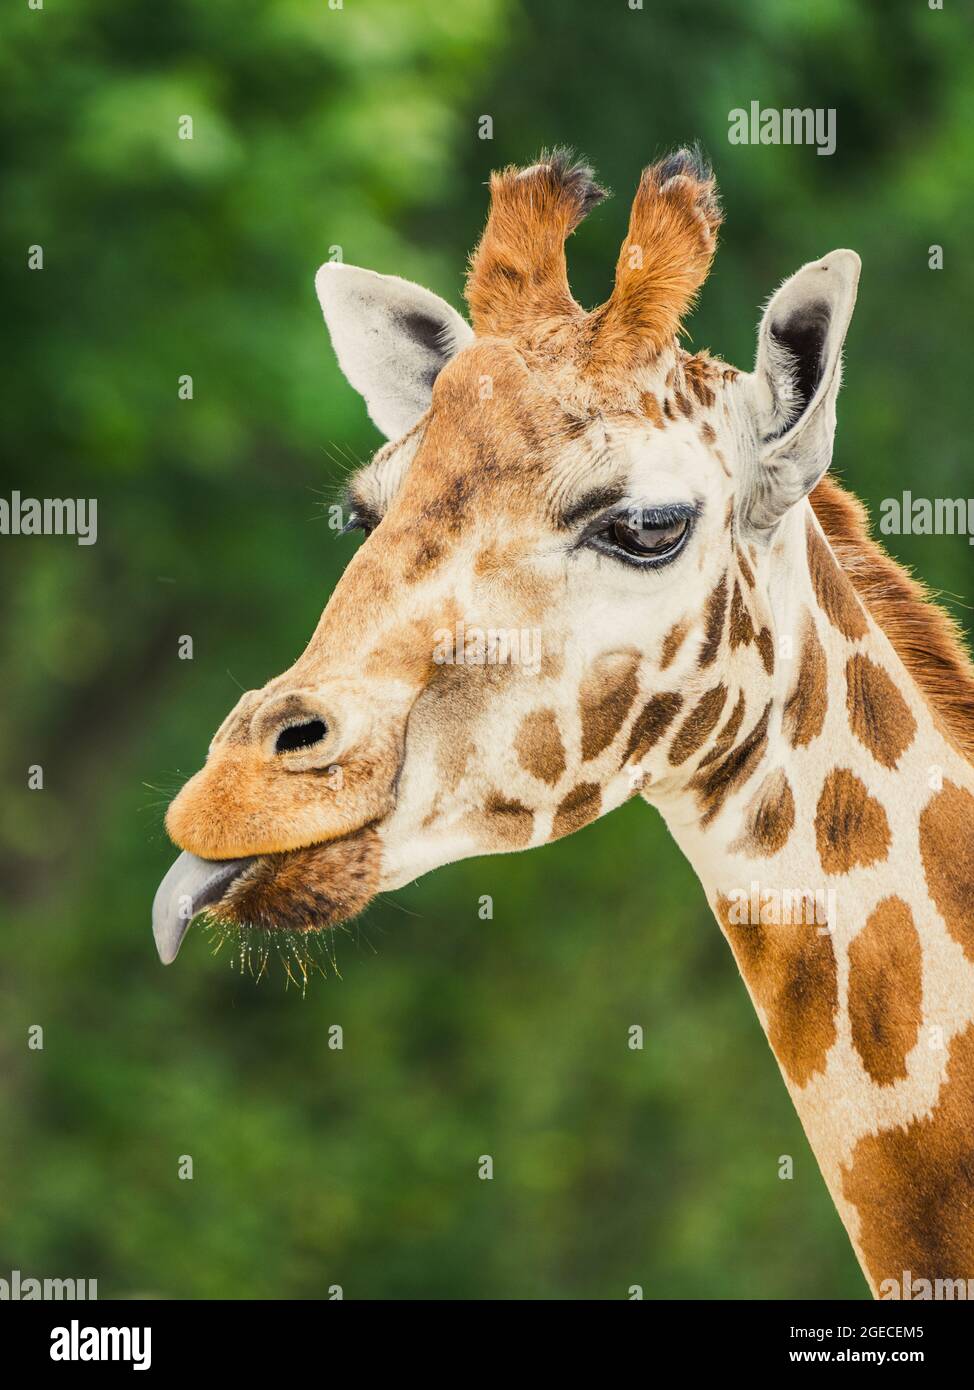 Cute giraffe portrait with tongue lolling out. Stock Photo